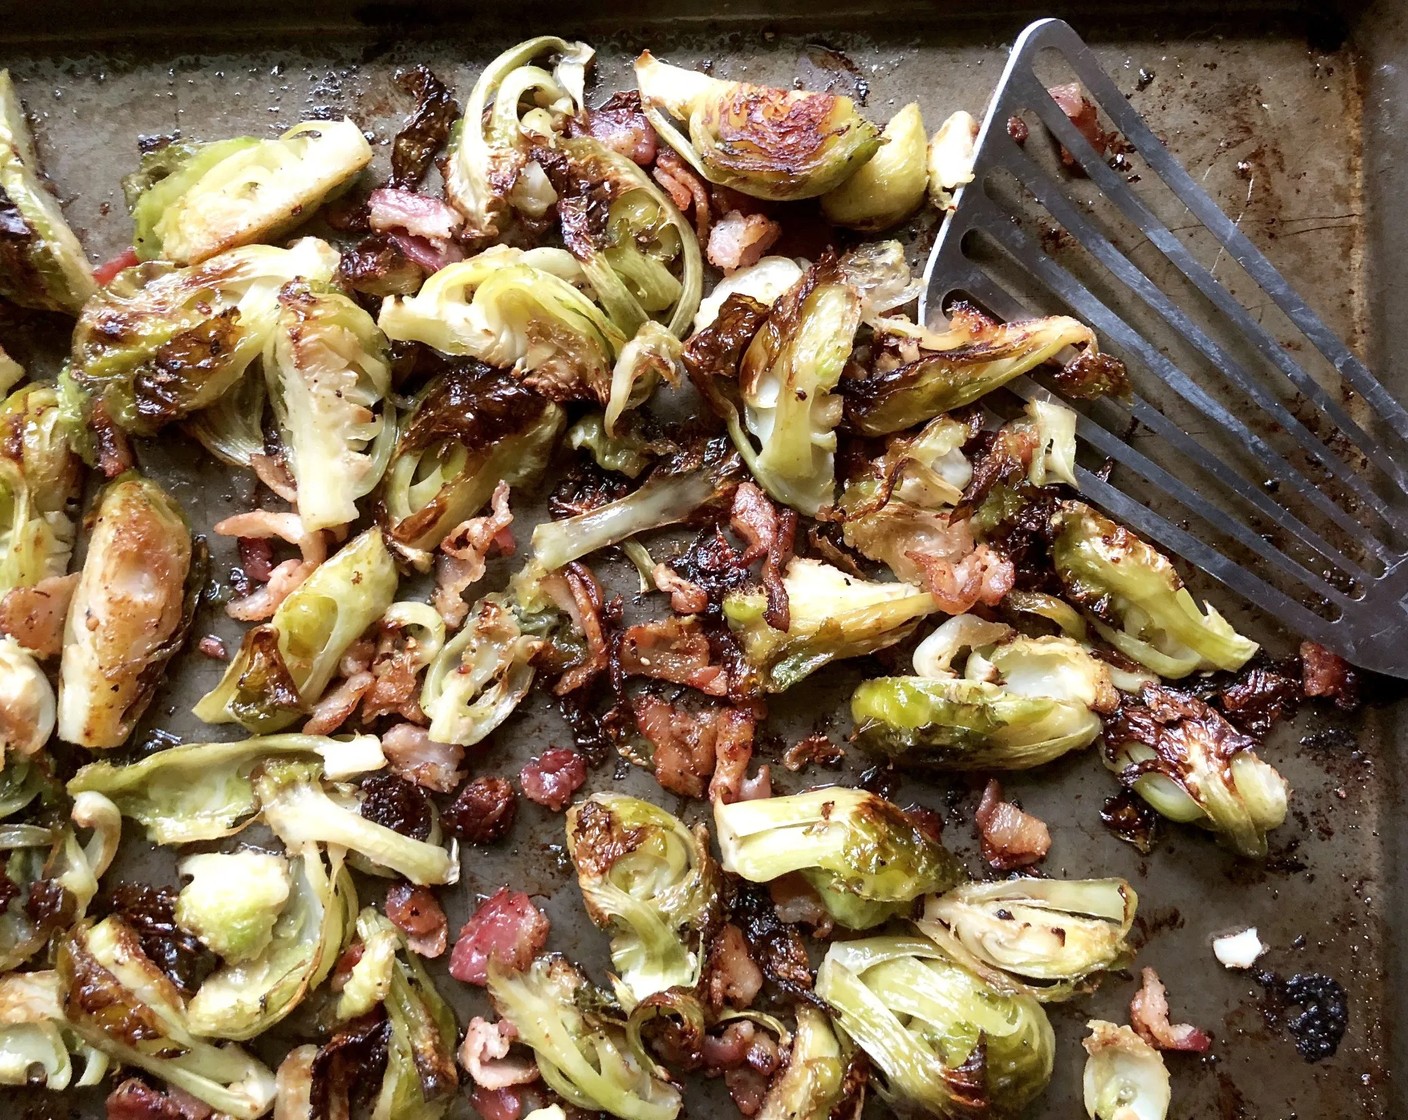 step 5 Roast the Brussels sprouts for 25 to 30 minutes, until they’re tender and nicely browned and the bacon is cooked. Toss once during roasting.